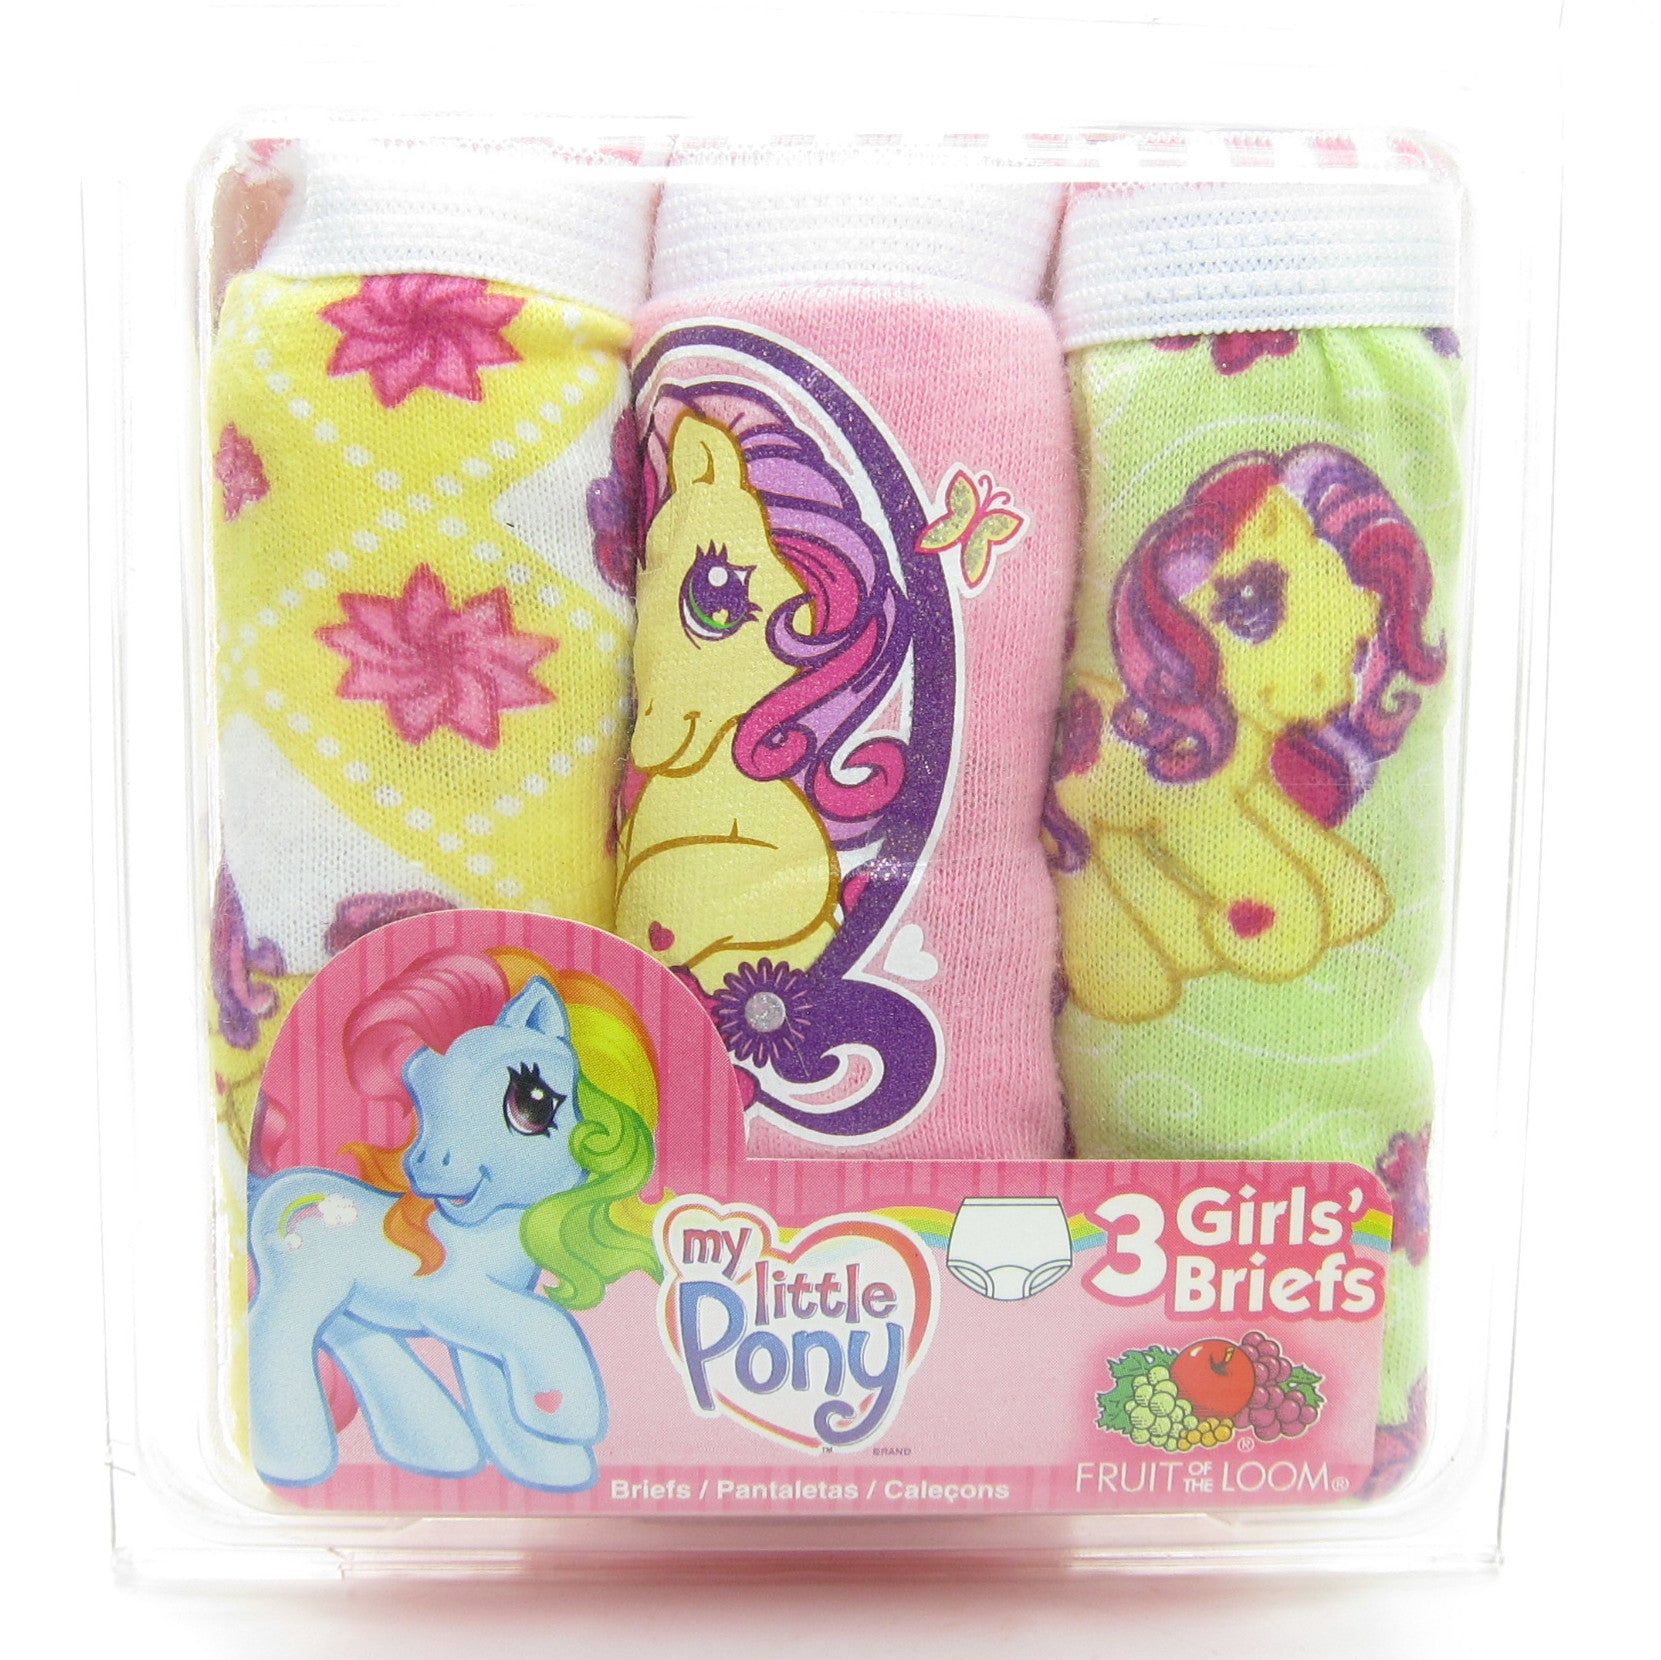 Girls My Little Pony Knickers Briefs 3 Pack Underwear Pants Ages 2-6 Years